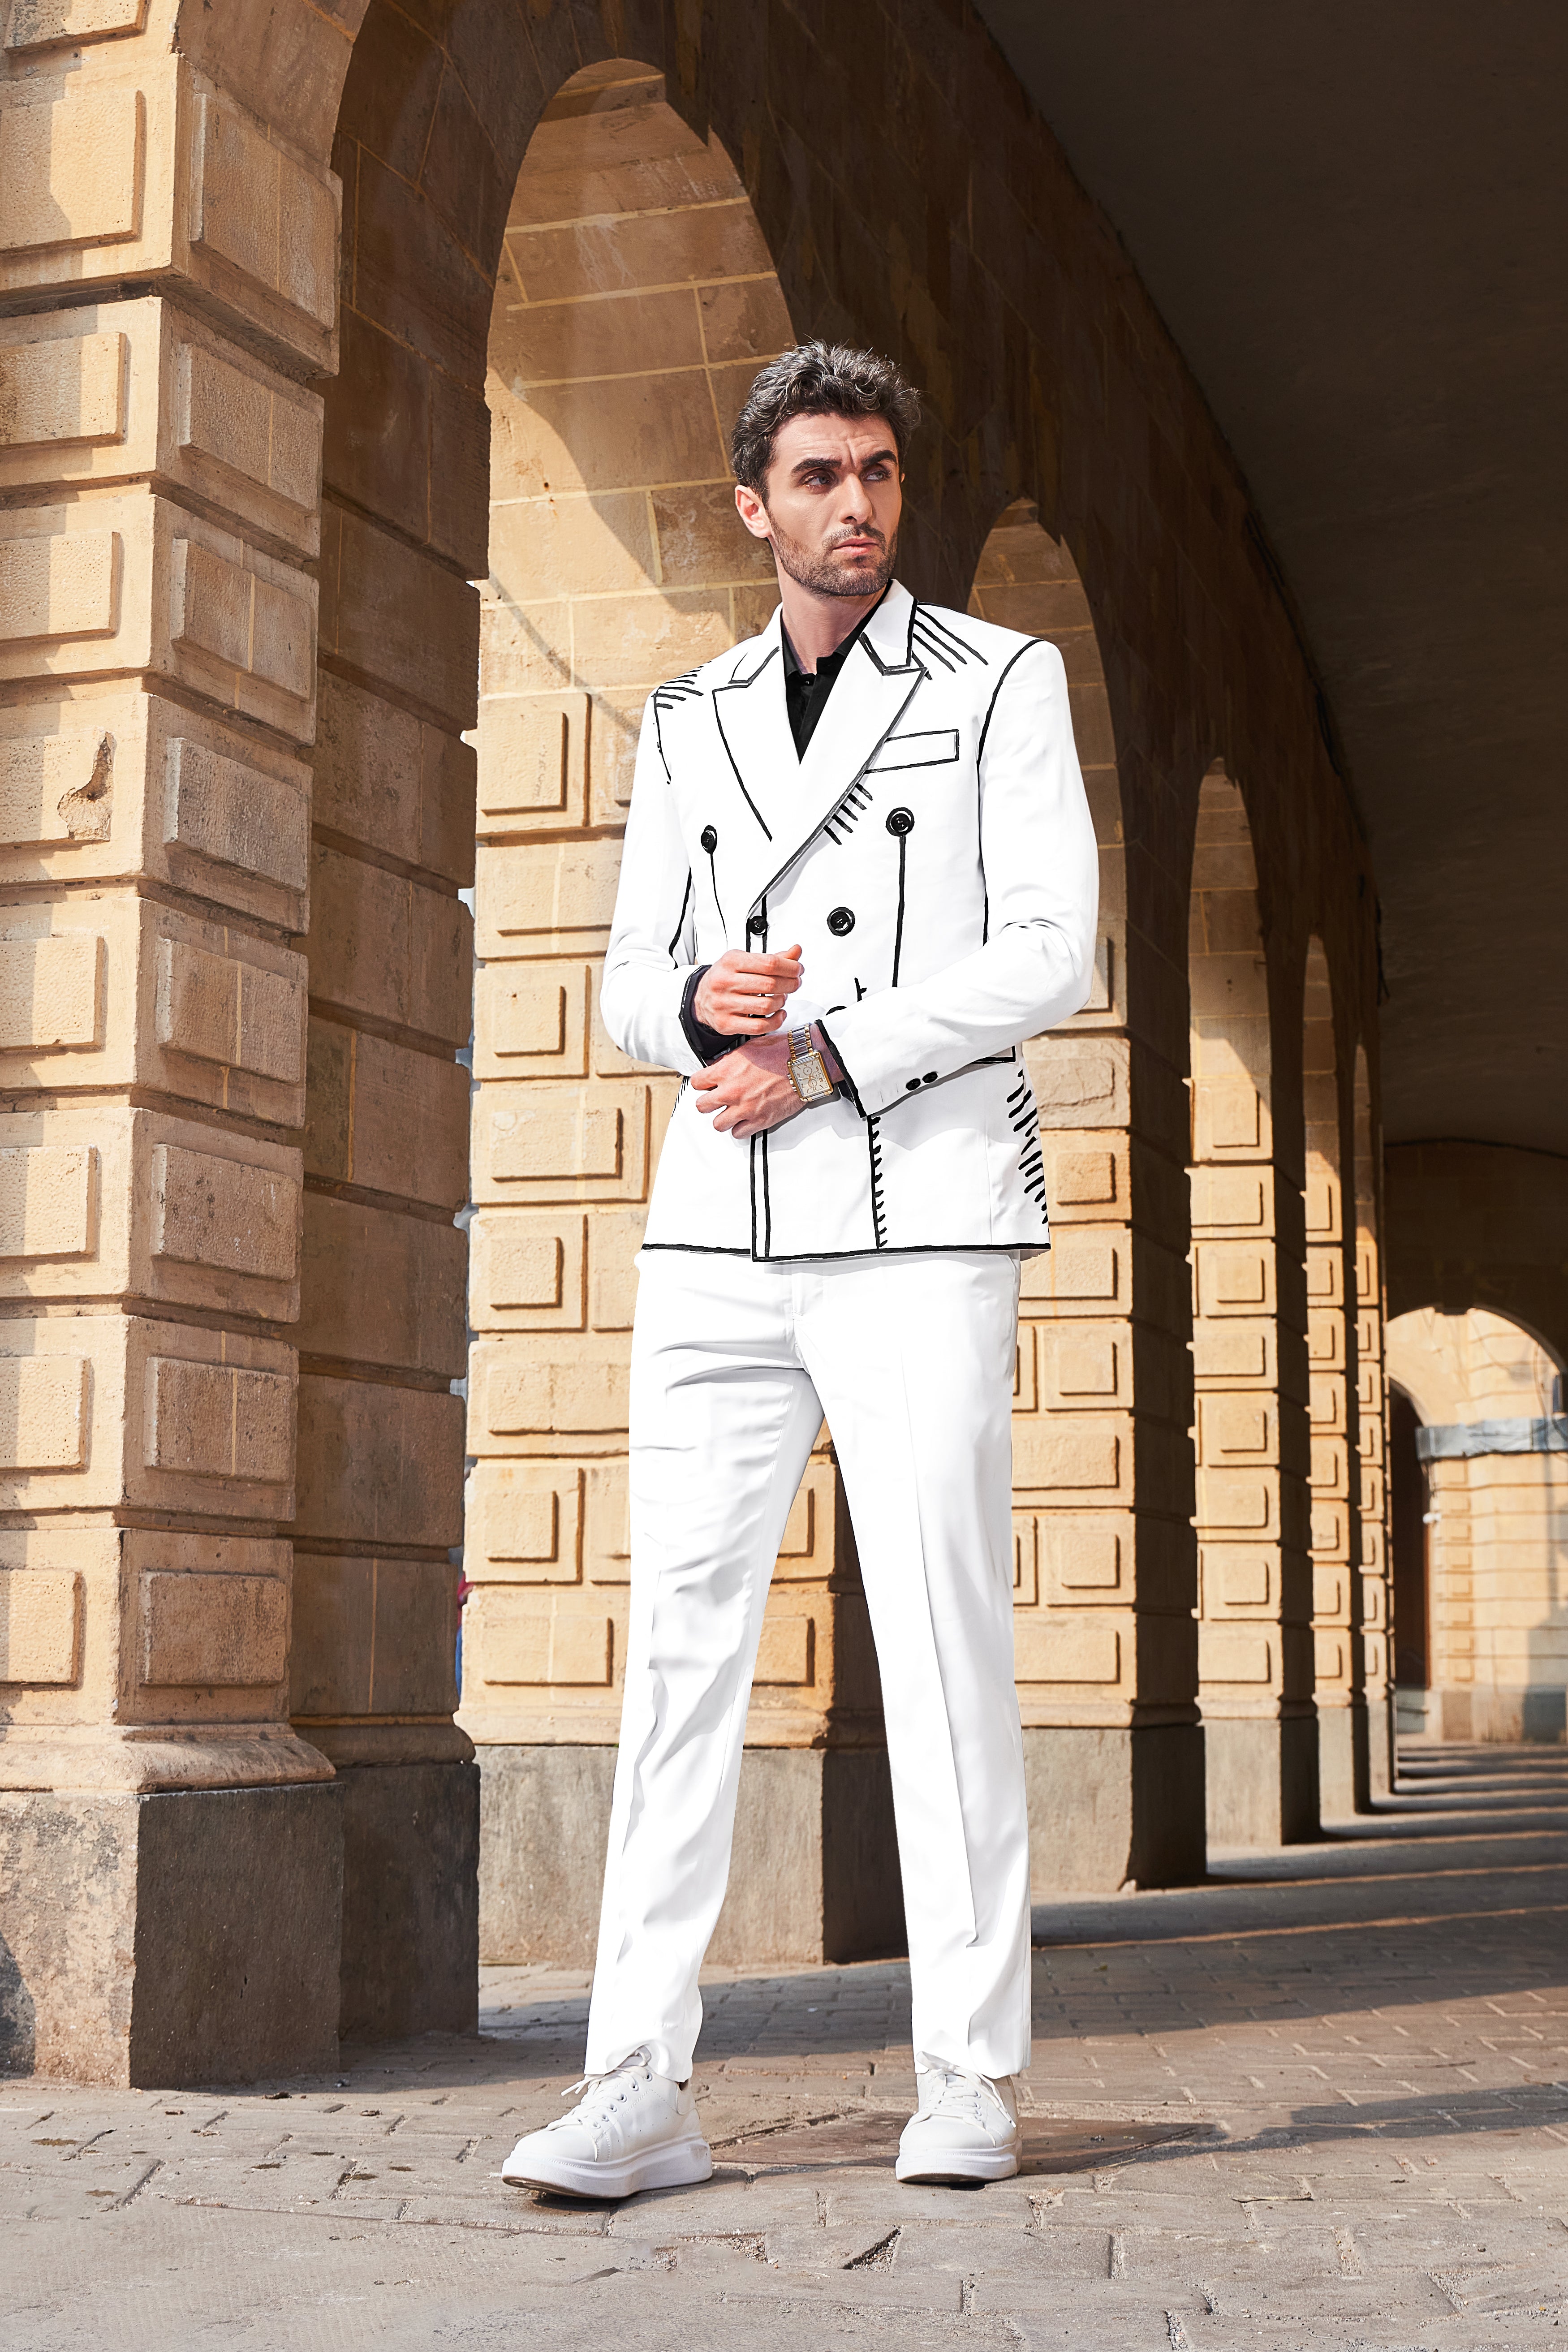 Bright White with Black Hand Painted Designer Suit